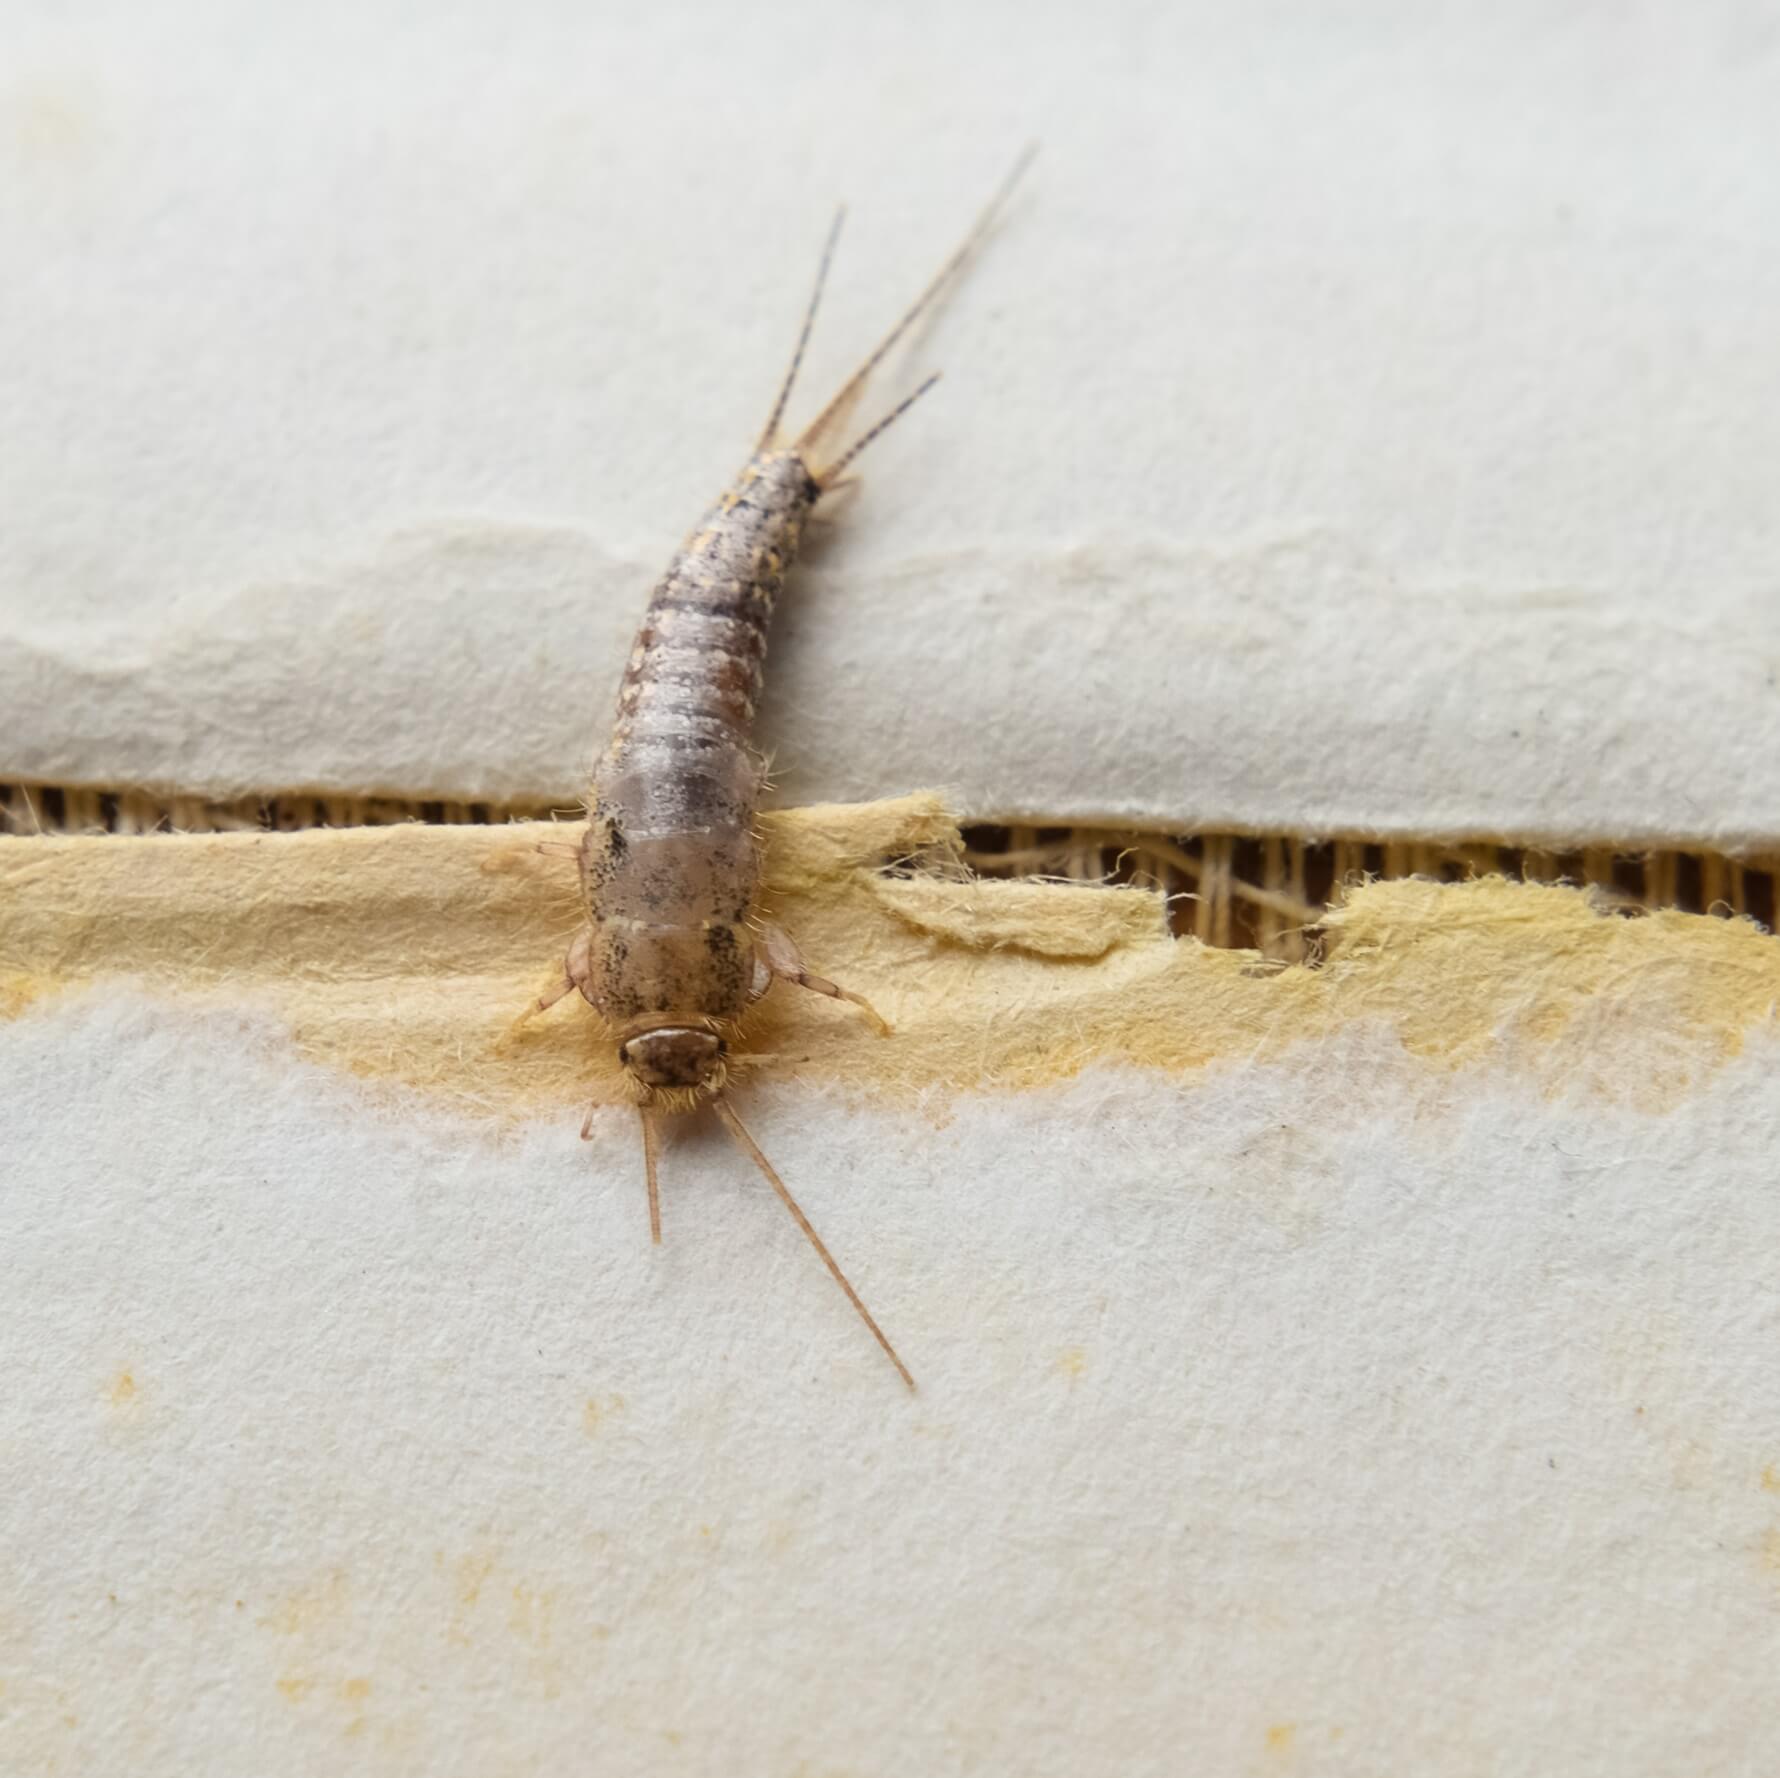 Silverfish in book, leaving yellow stains and eating holes in the paper and fabric cover and spine. Get Silverfish pest control to deal with an infestation.